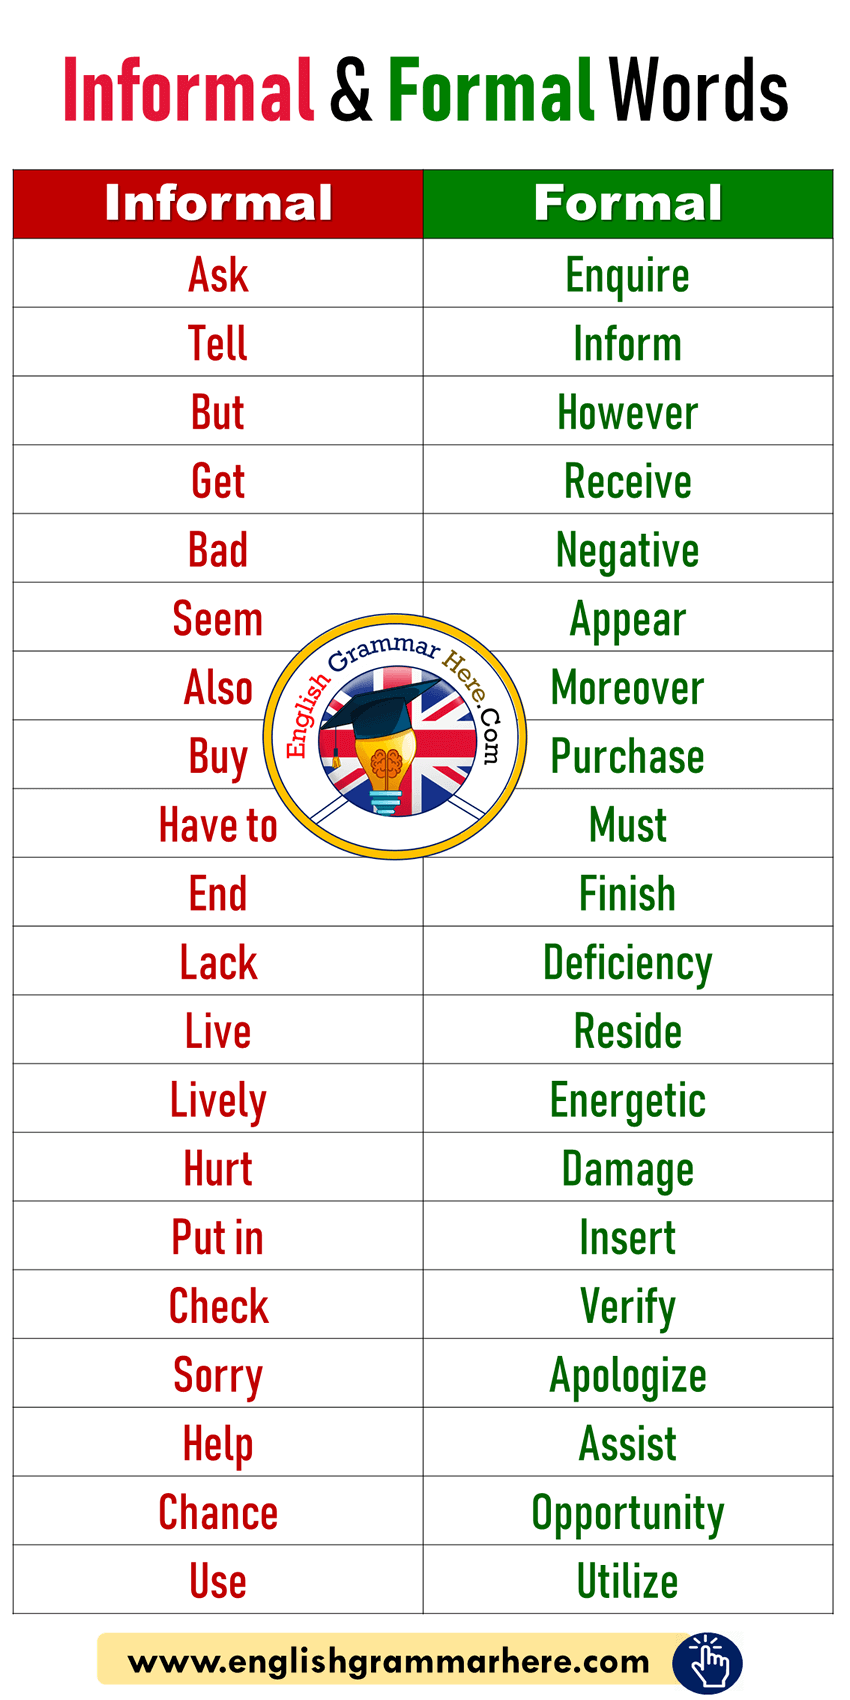 Informal and Formal Words in English - English Grammar Here